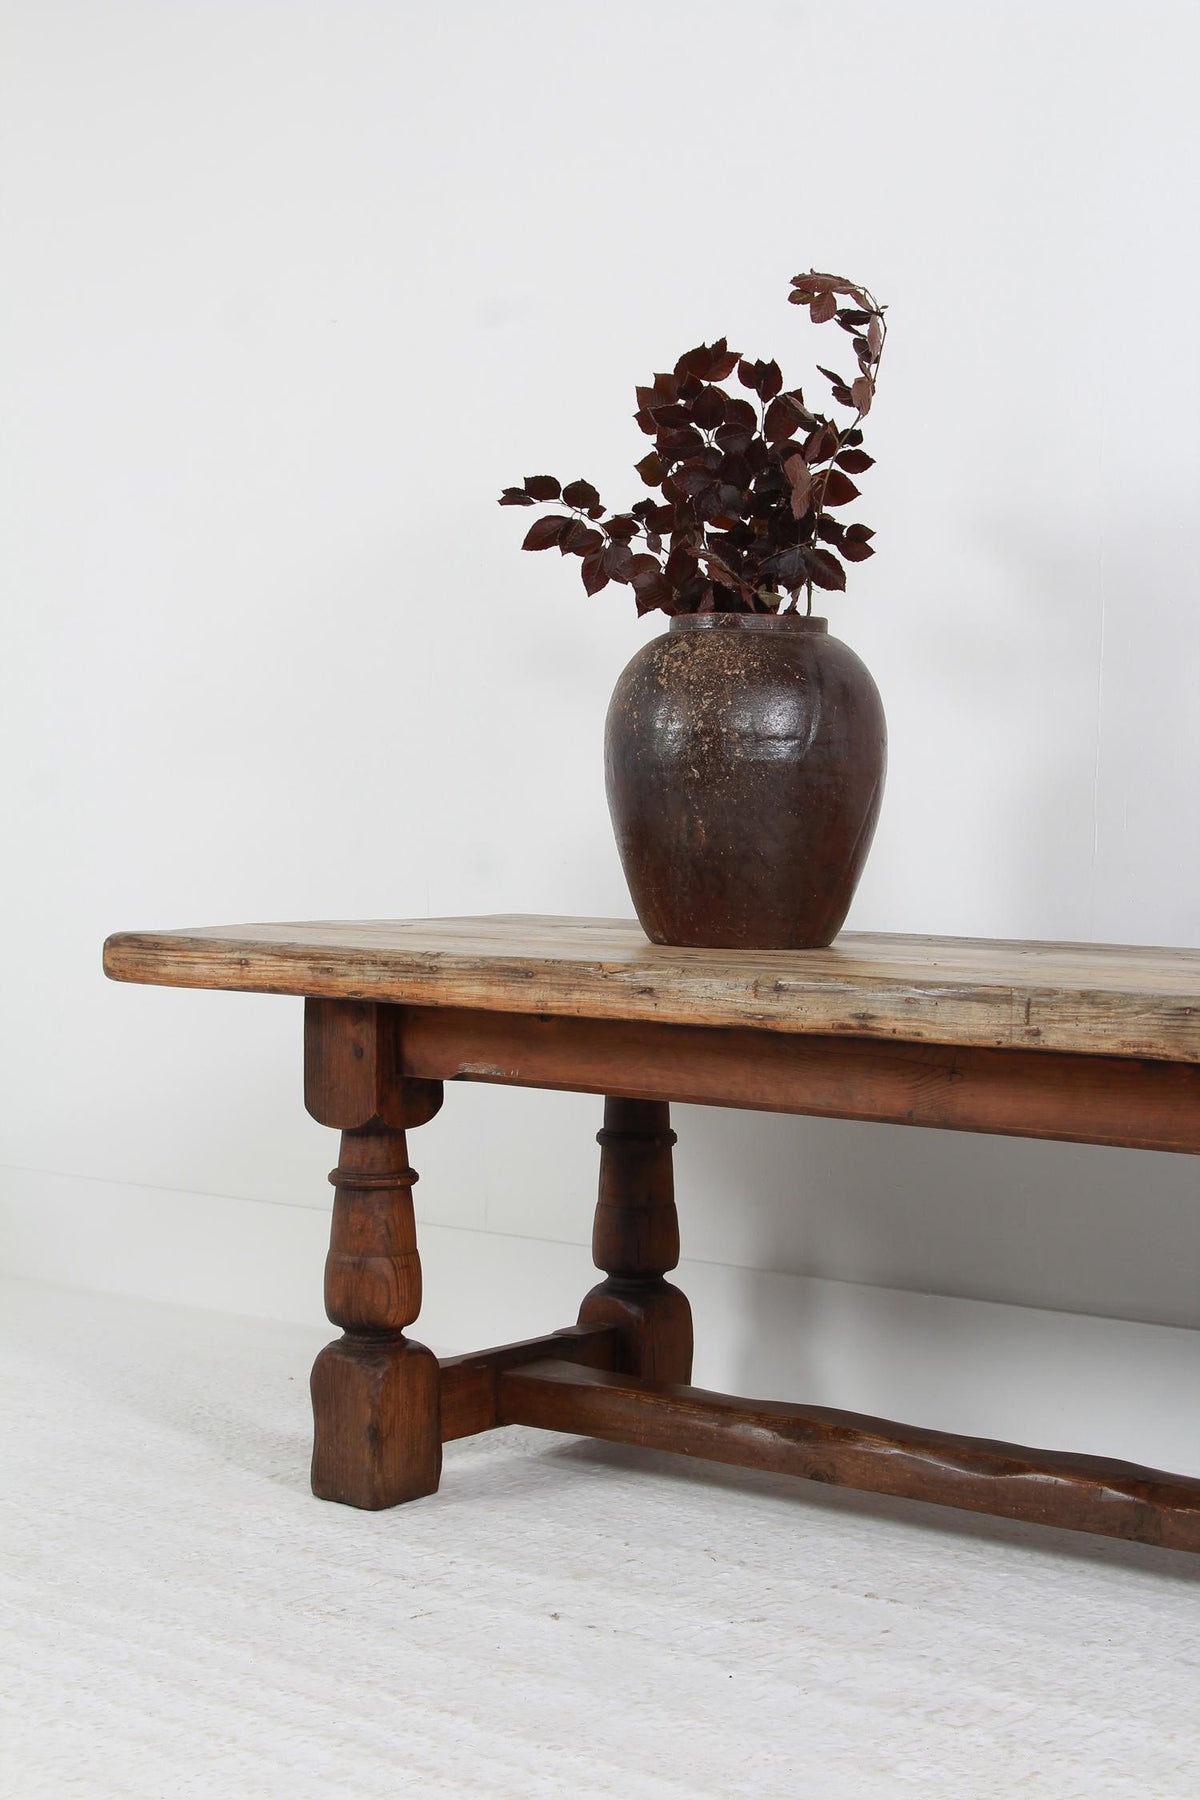 Swedish 19thC Country Pine Farmhouse Refectory Dining Table